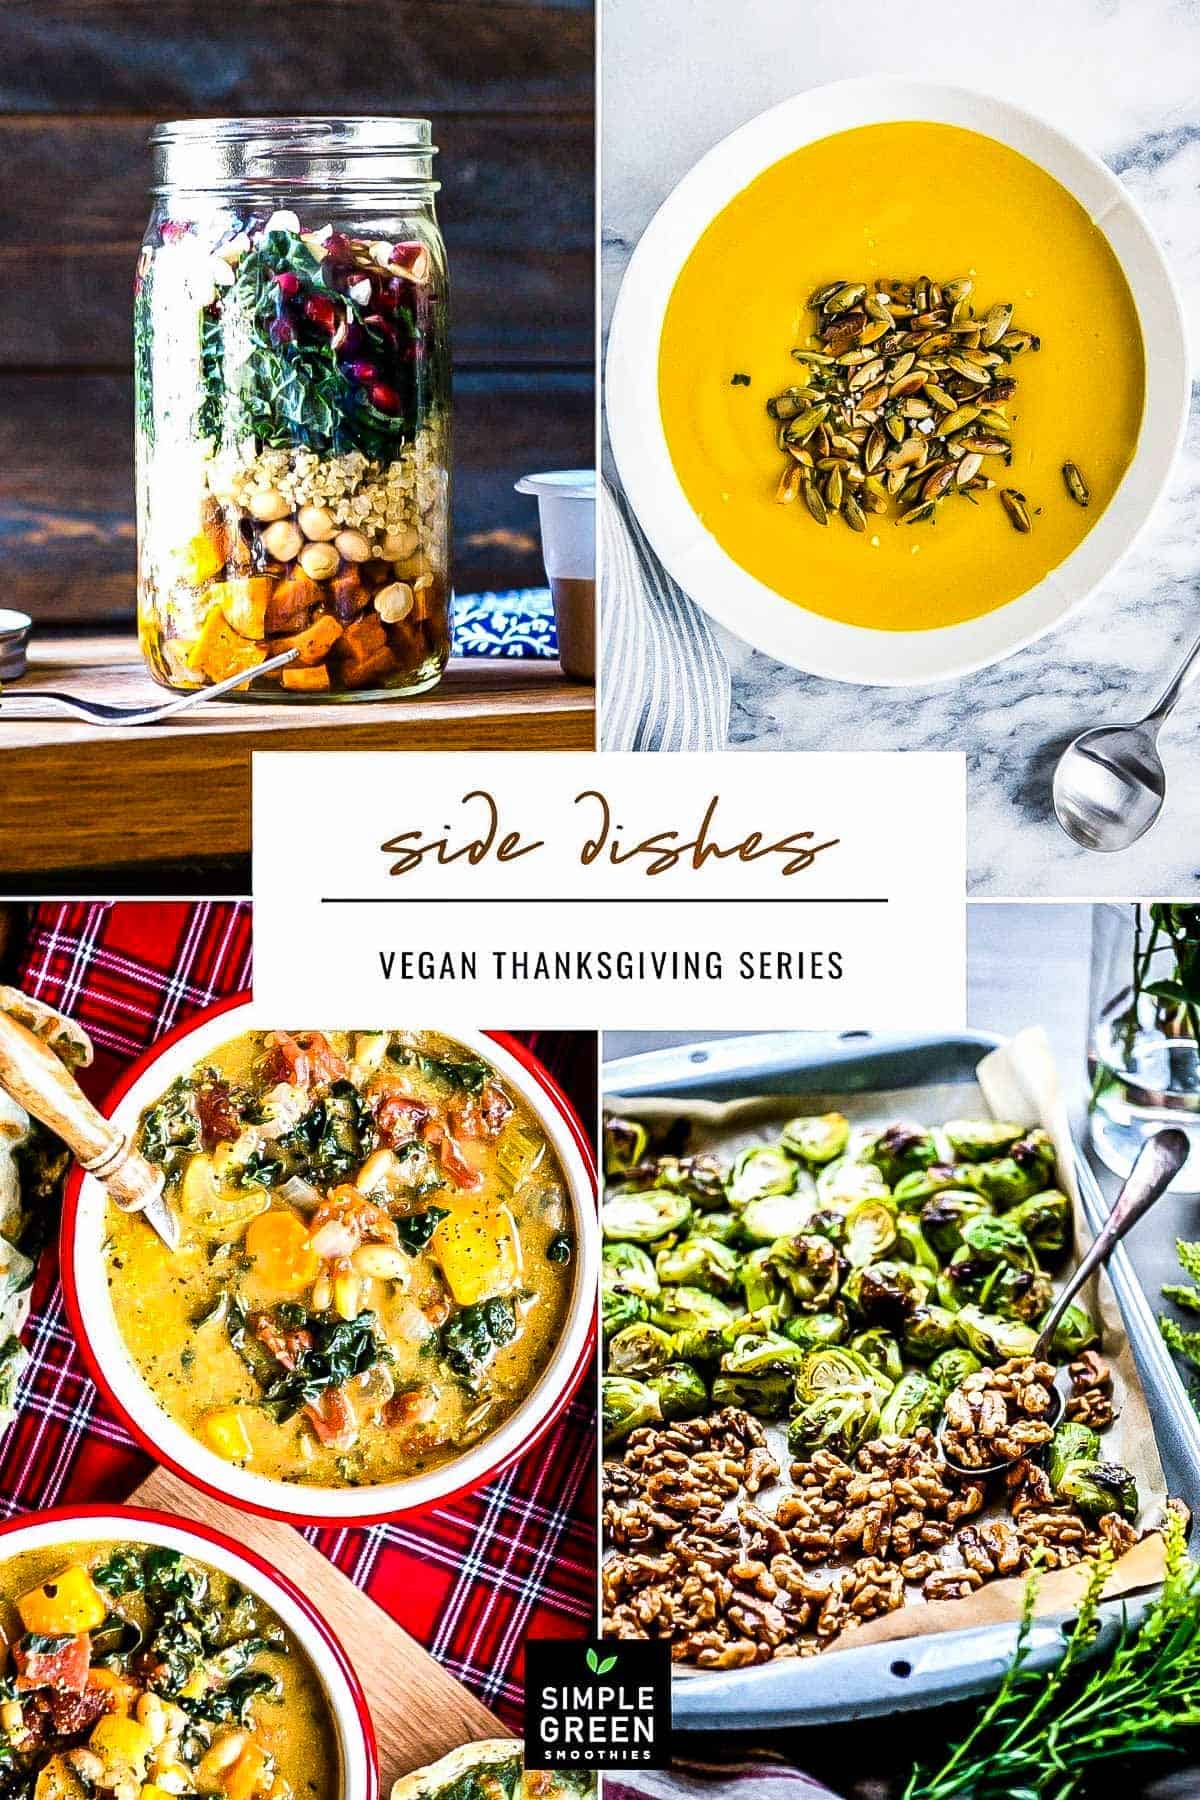 A festive lineup of vegan Thanksgiving side dishes